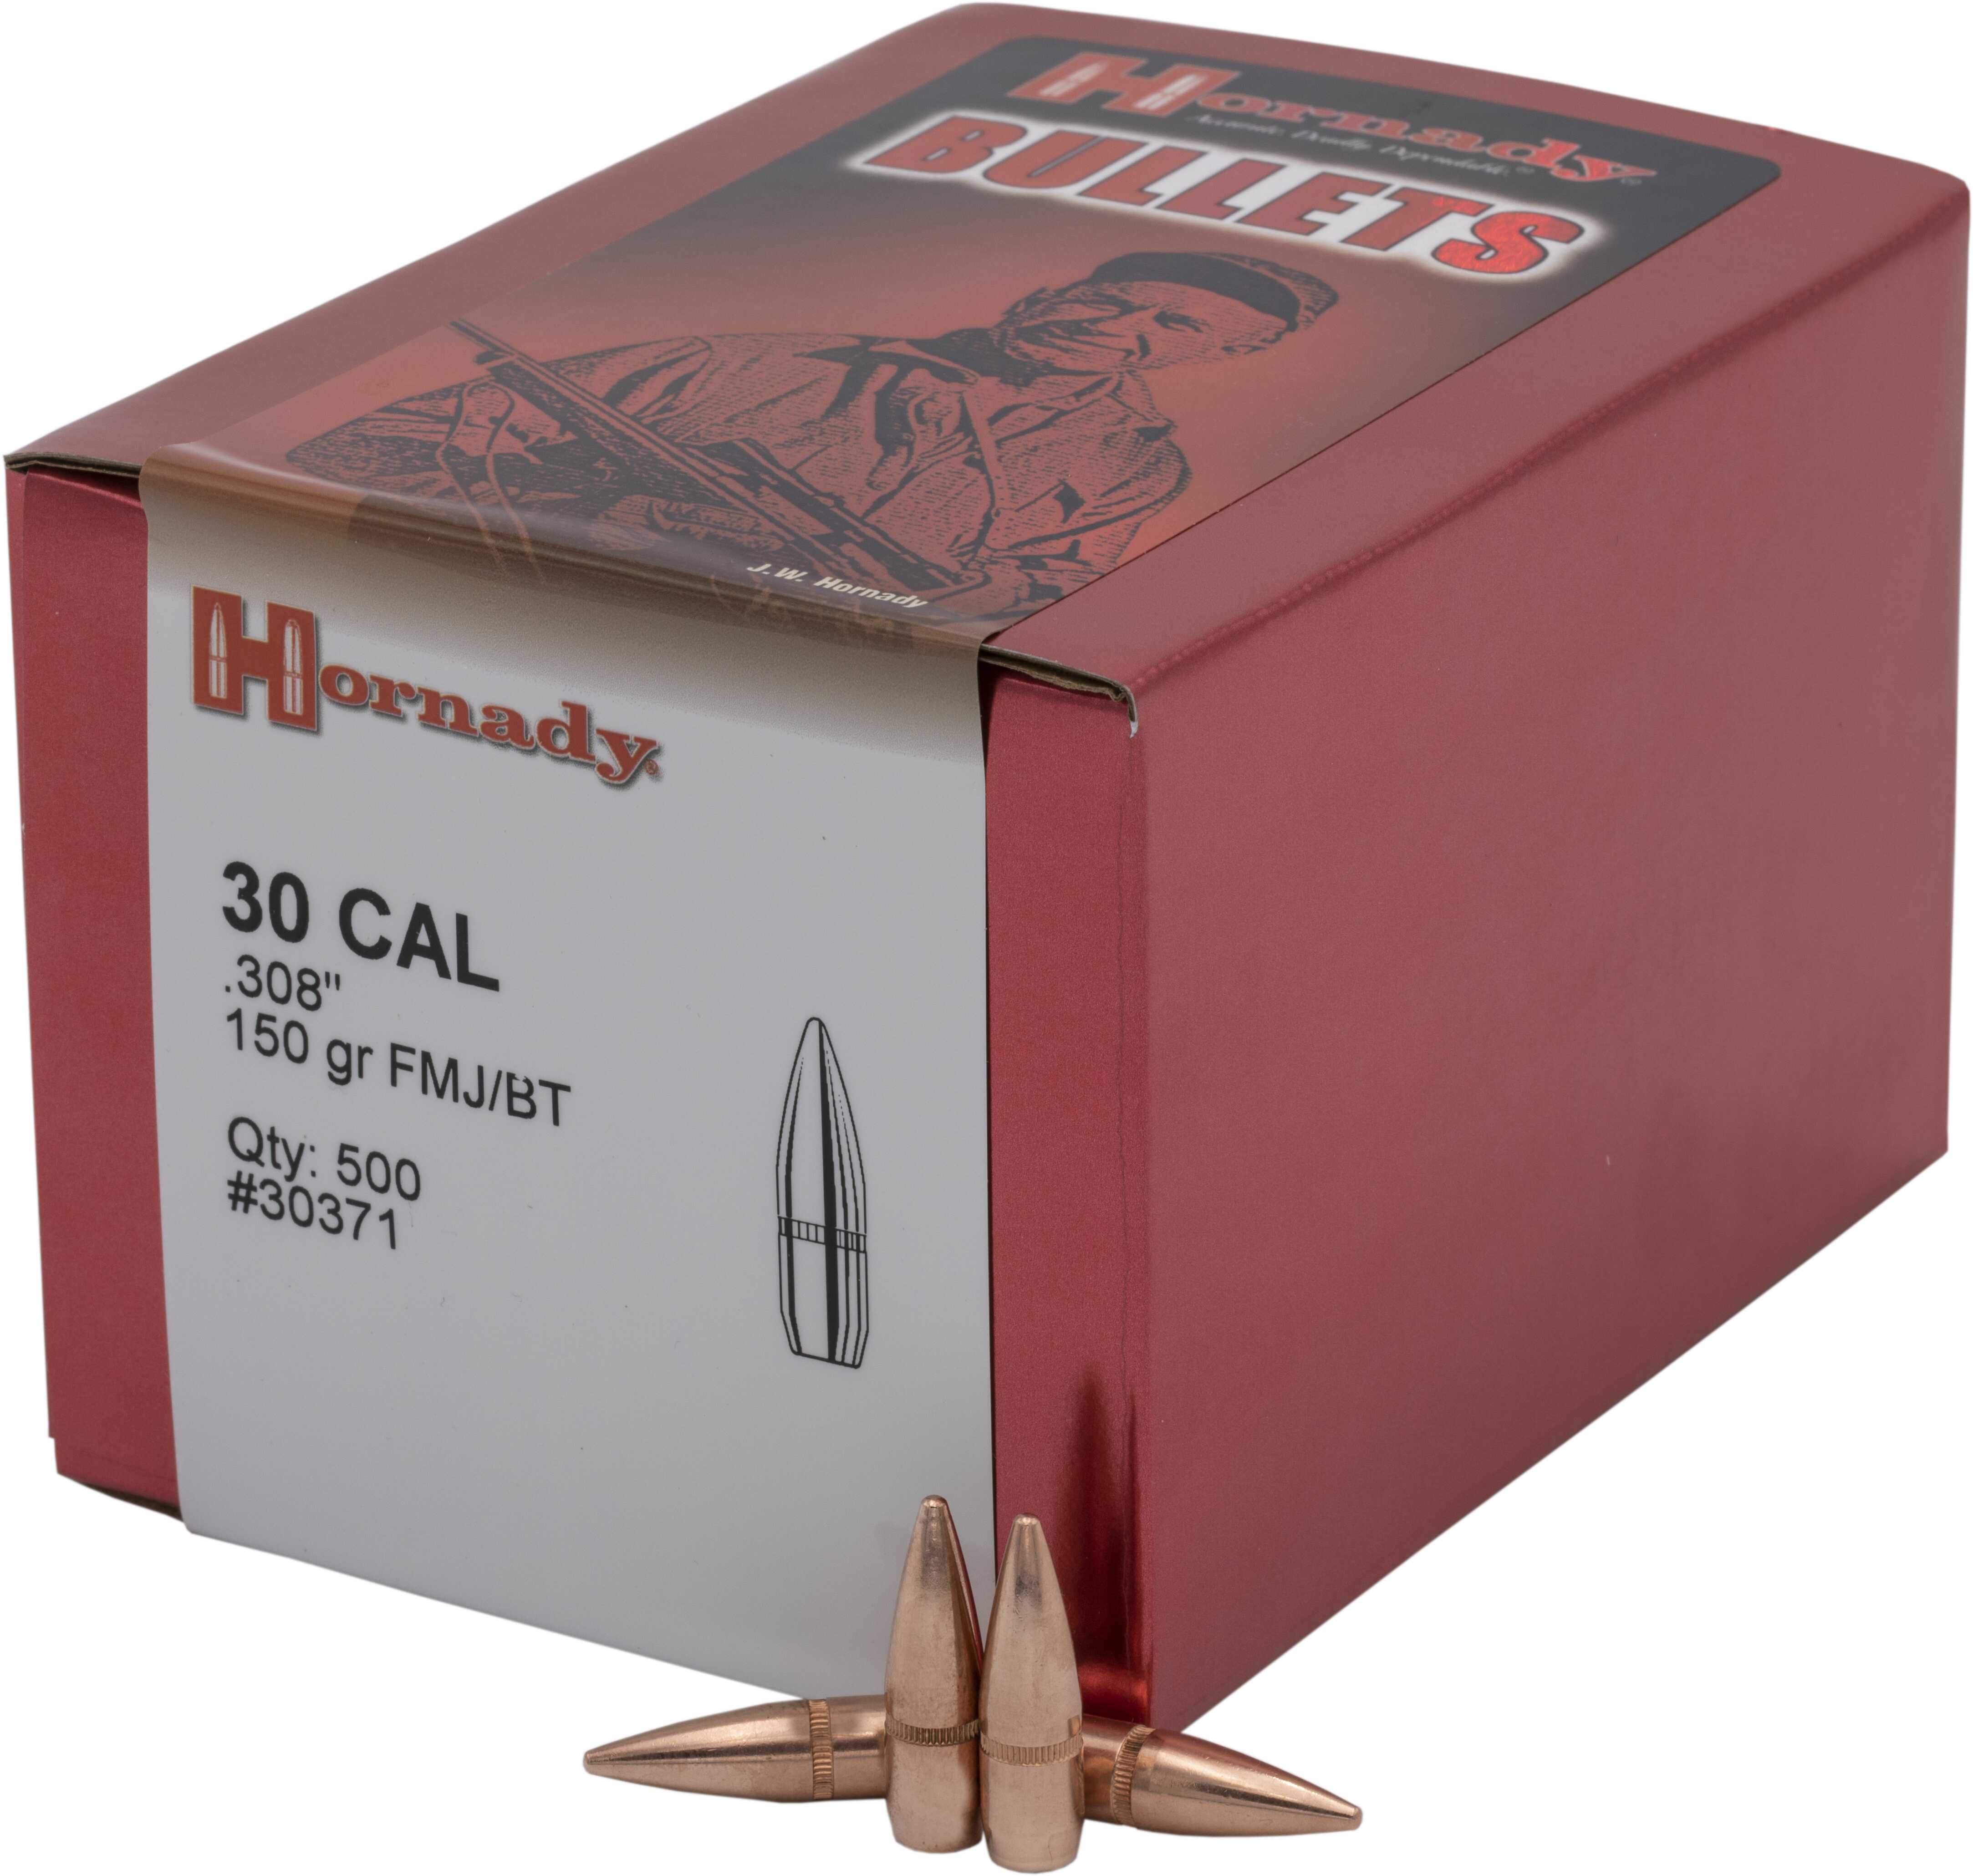 Hornady 30 Caliber Bullets (.308 Diameter) 150 Grains, Full Metal Jacket Boat Tail with Cannelure, Per 500 M